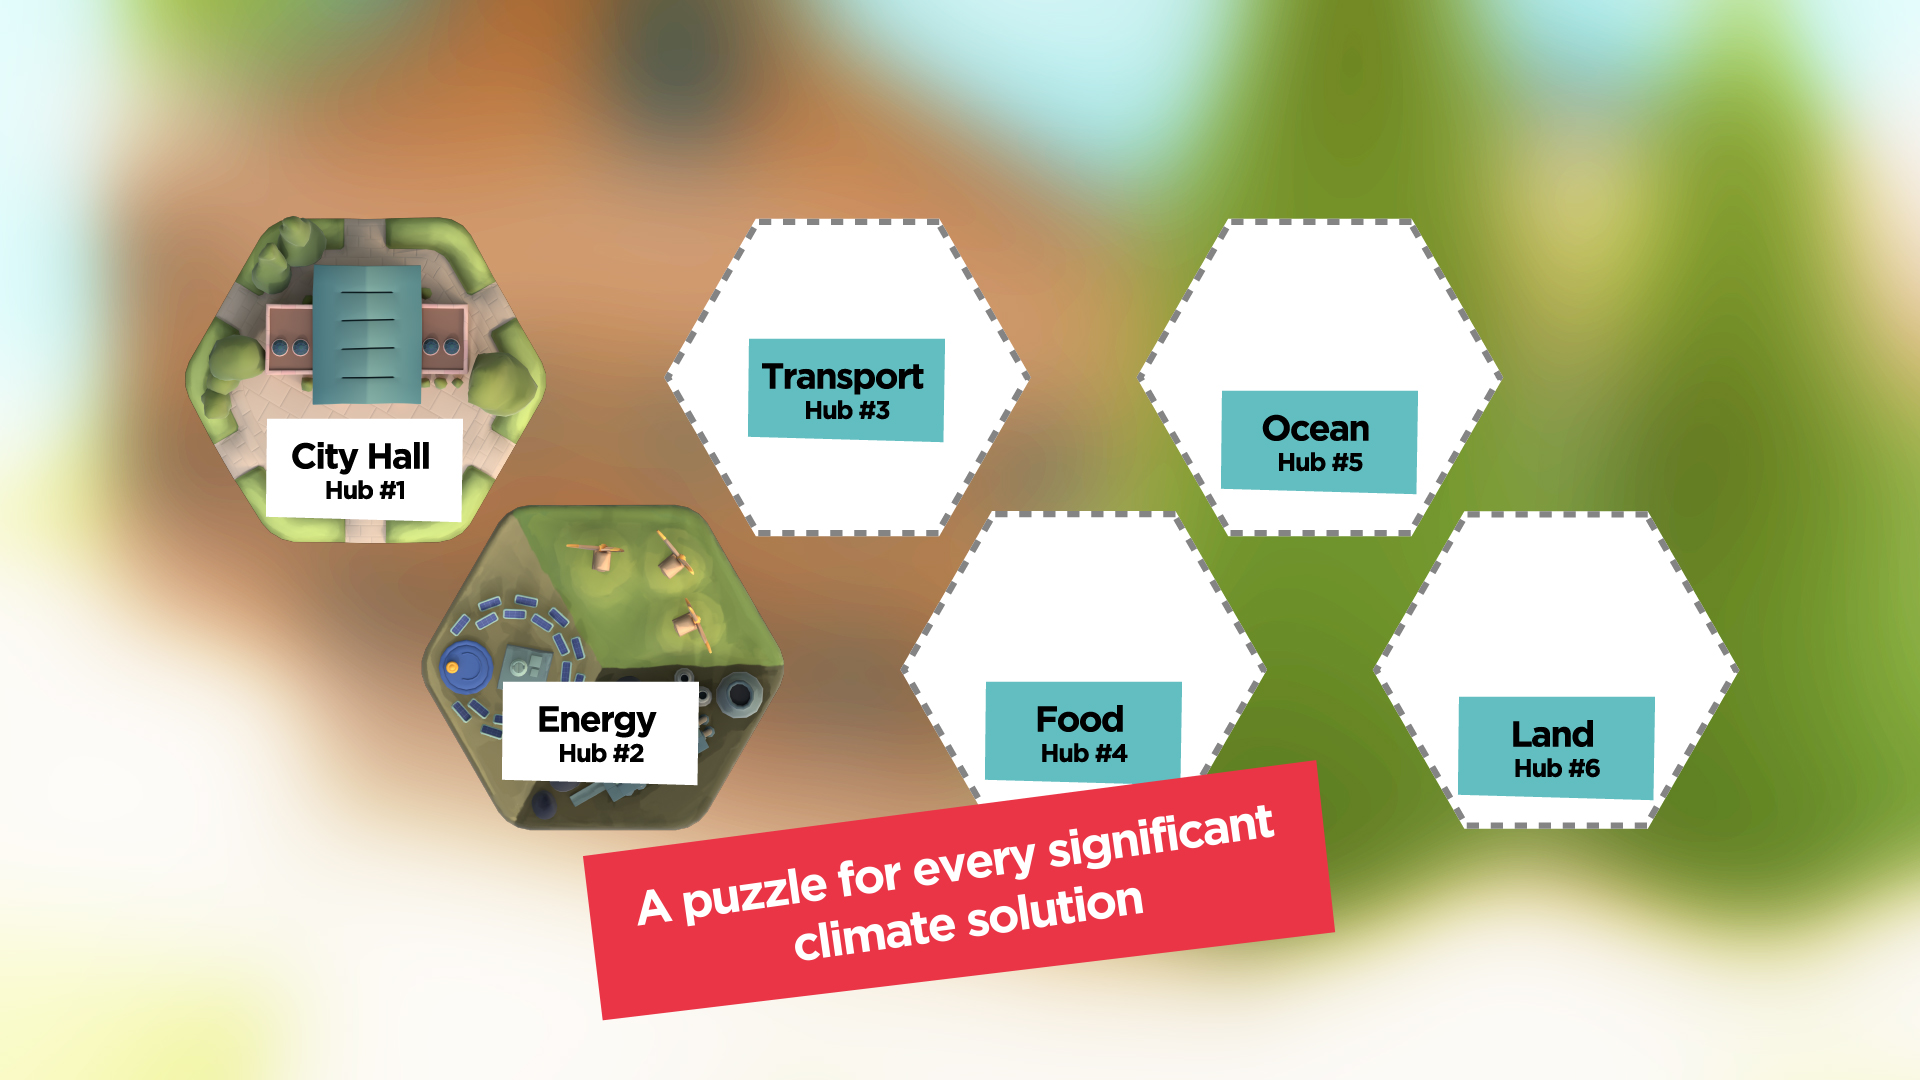 6 hexagons representing different types of climate solutions, with the City Hall and the Energy hexagons filled in with a birds eye view of the respective environment.